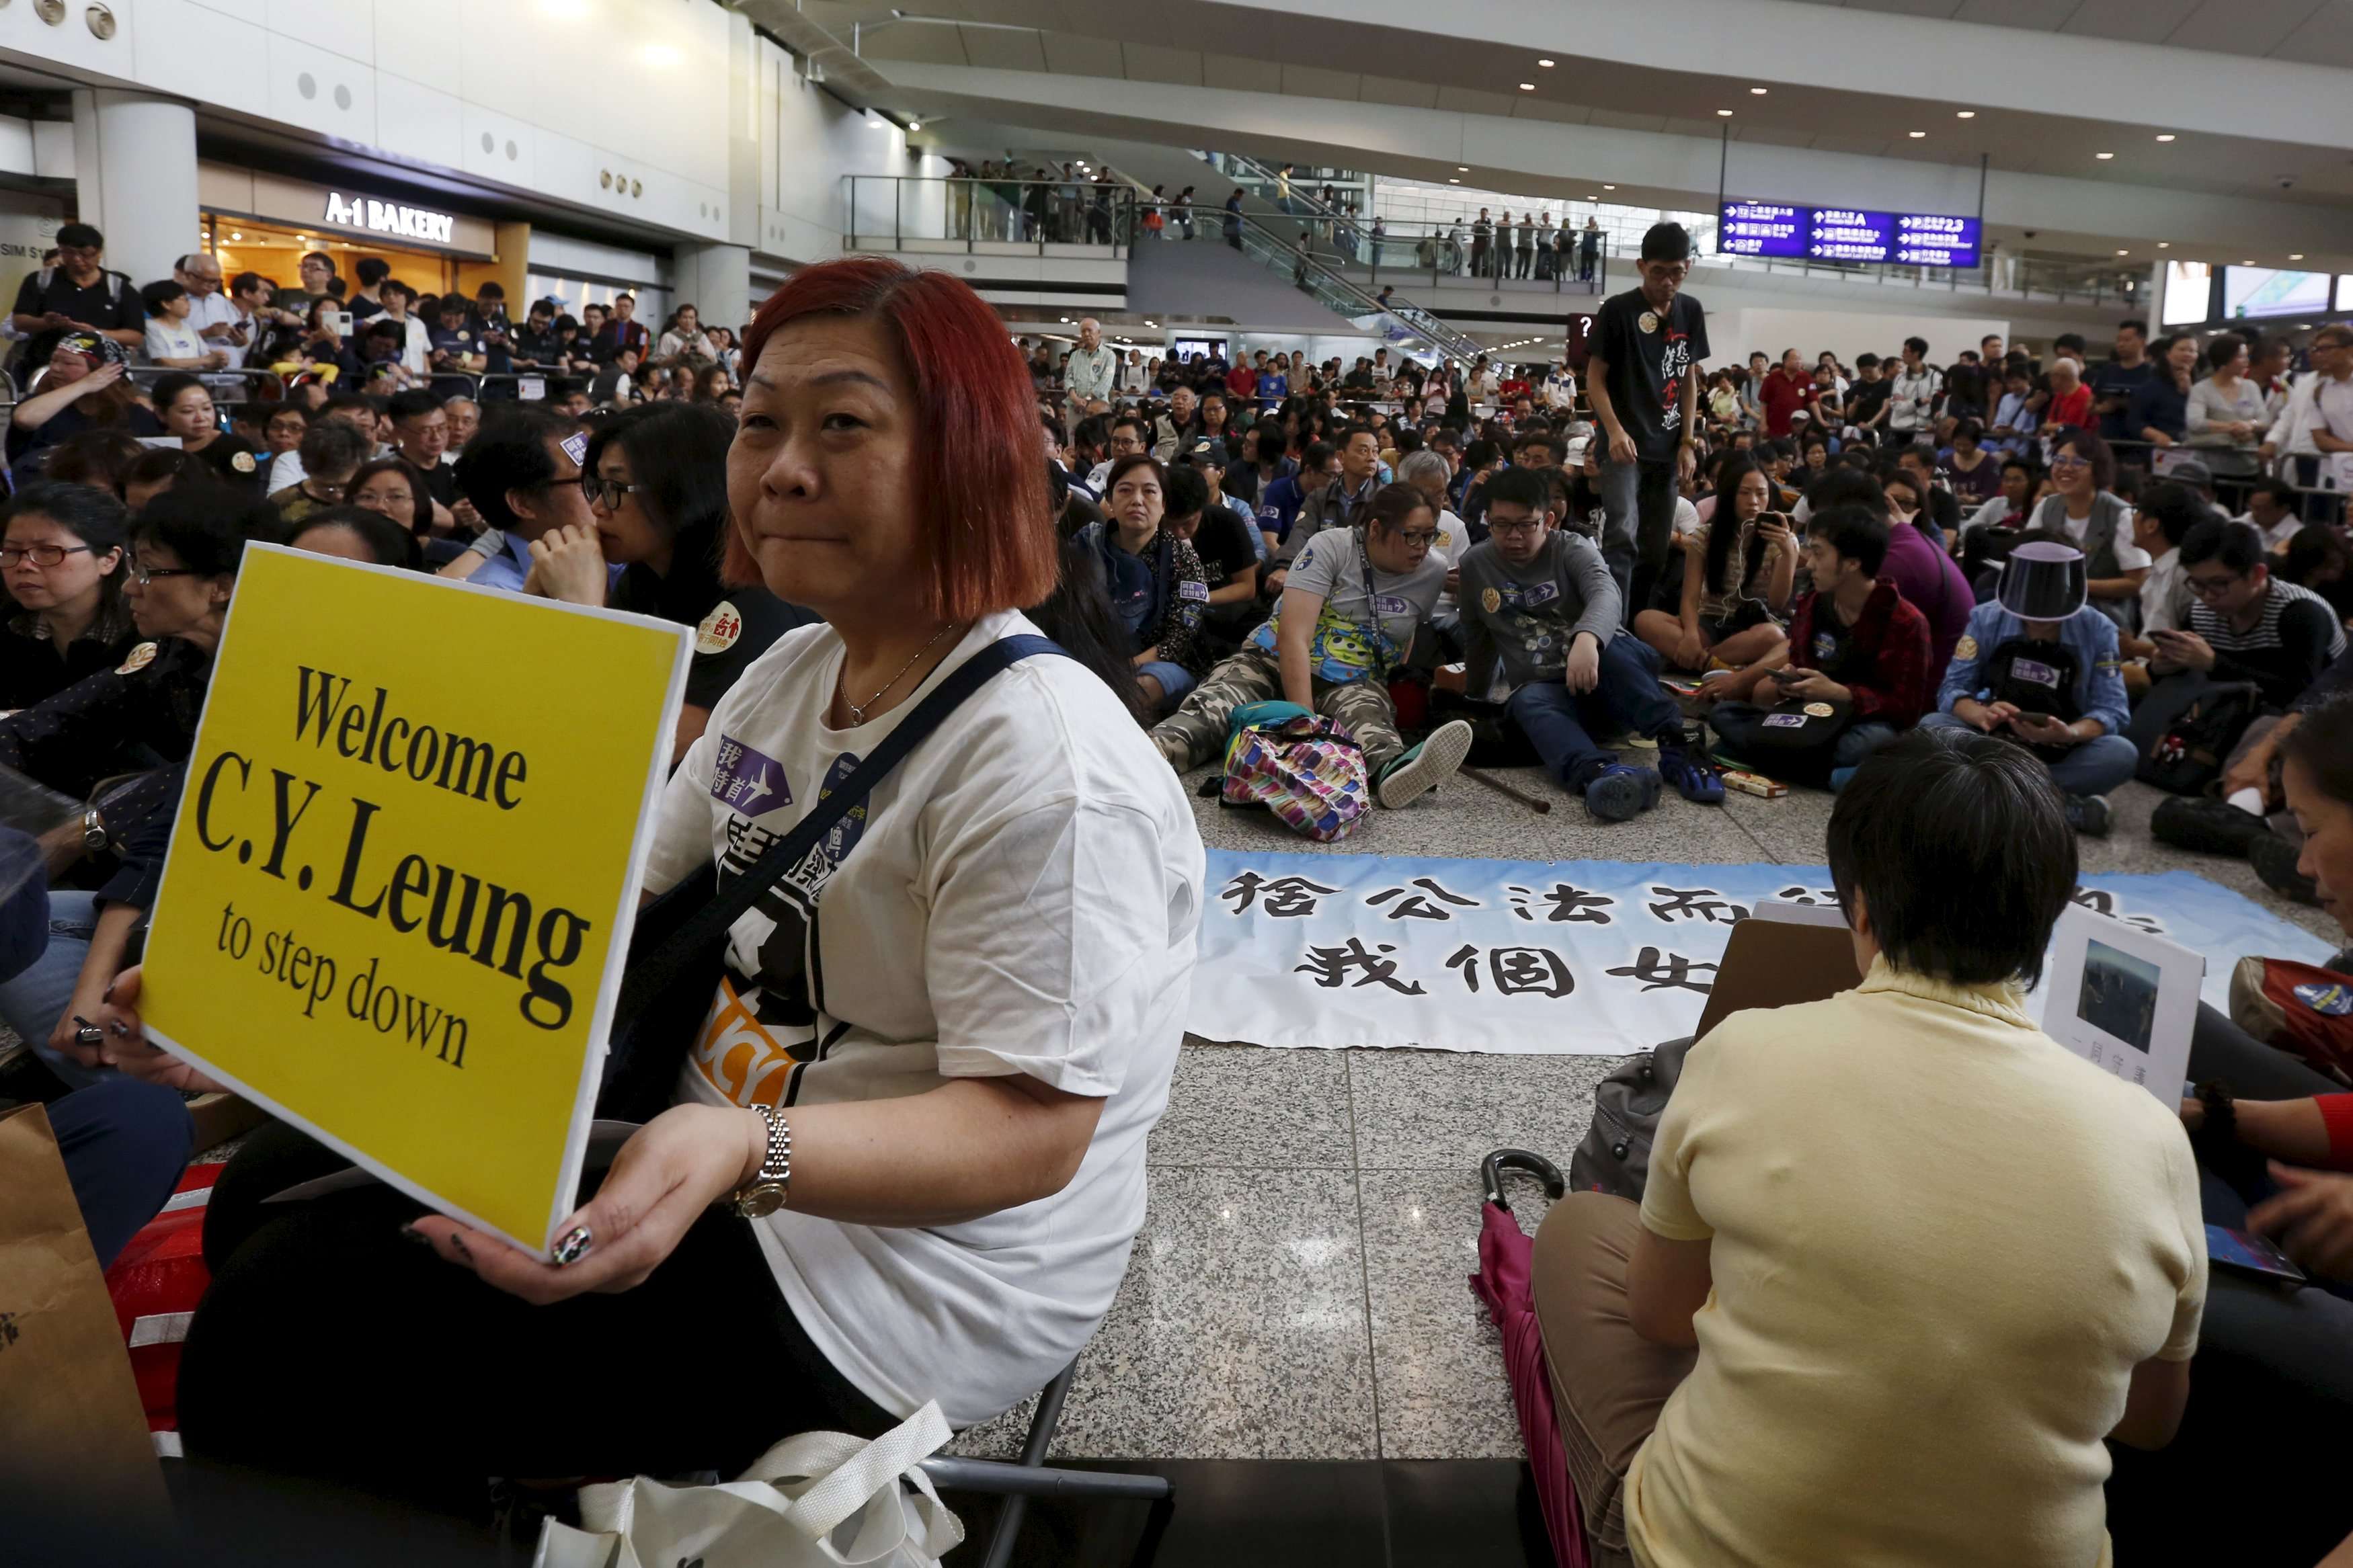 More than 1,000 people protested at the Hong Kong airport against Leung Chun-ying’s alleged abuse of power. Photo: Reuters